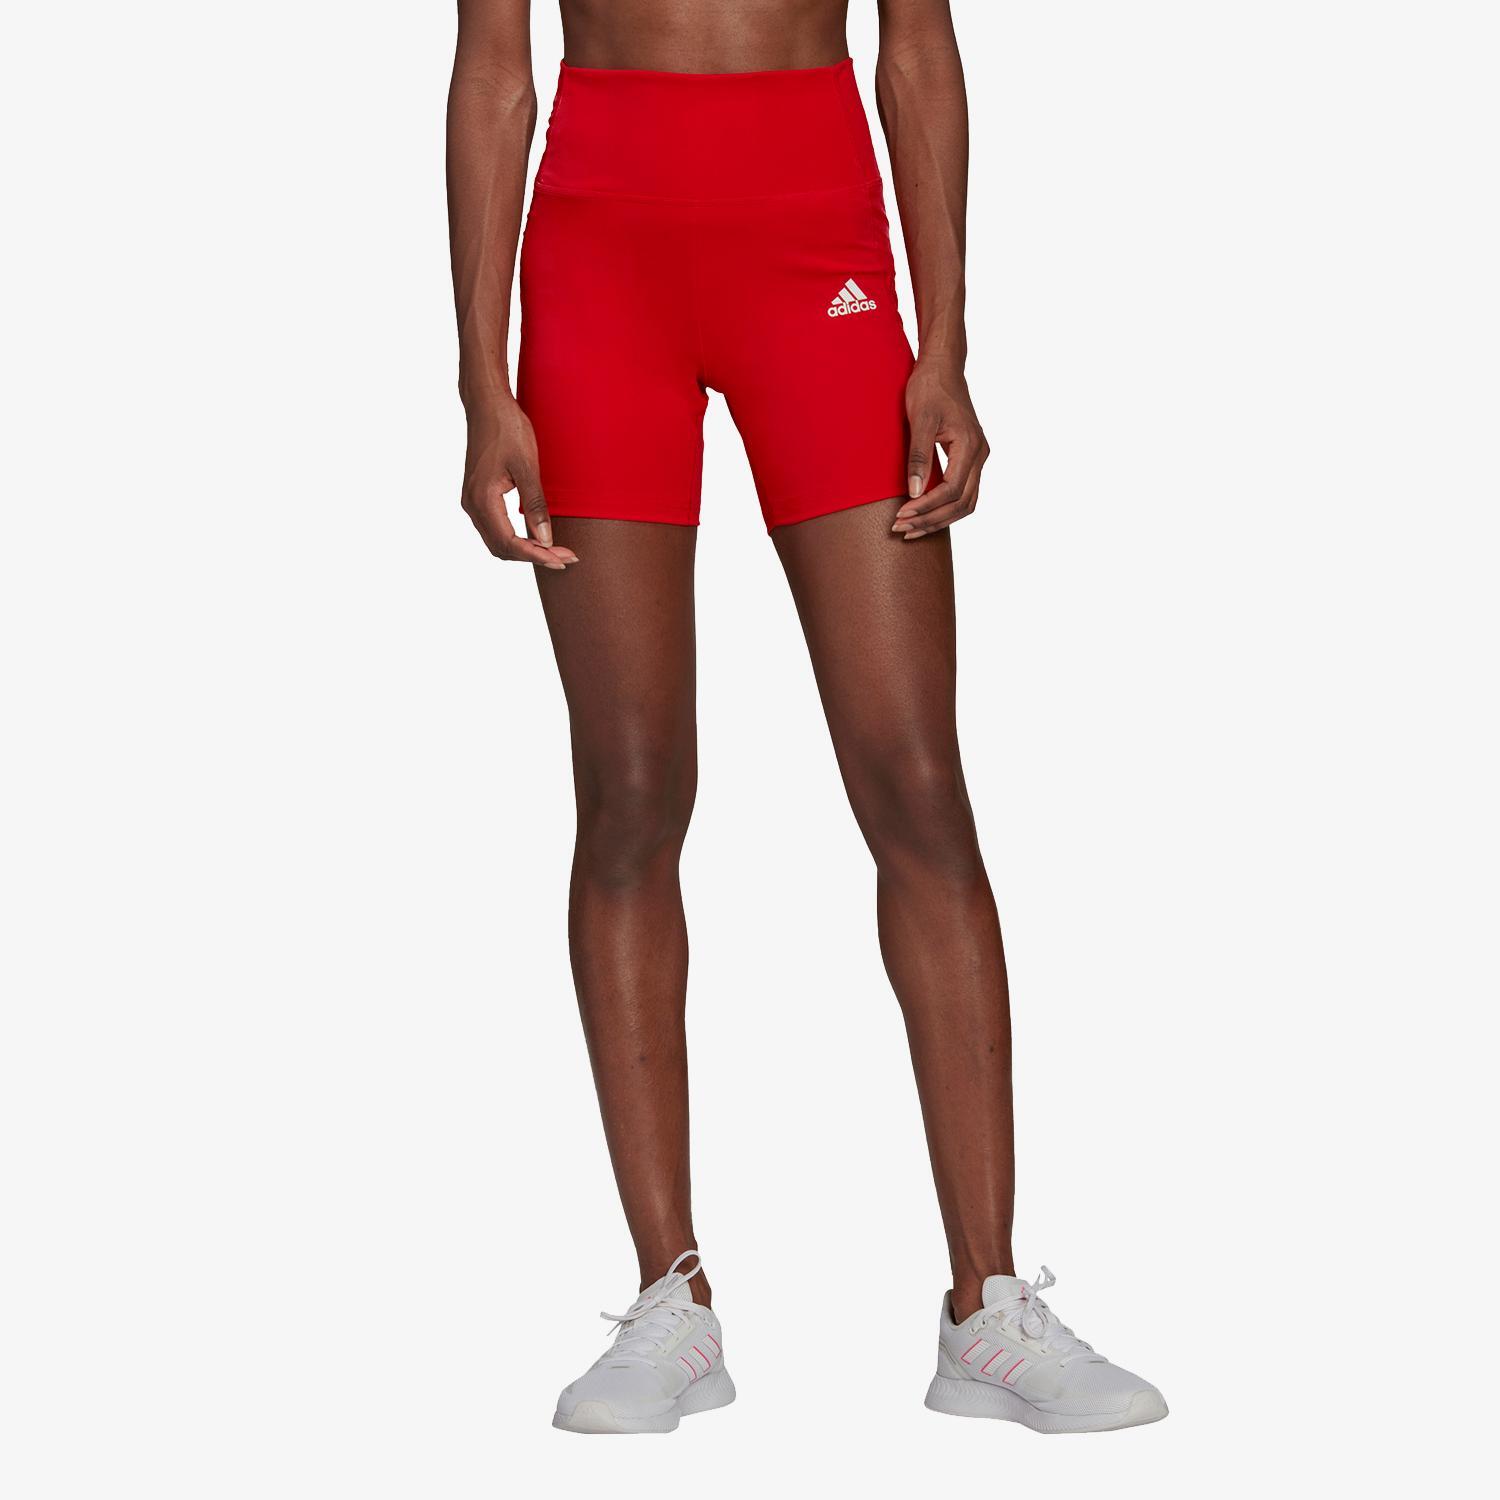 adidas Brilliant - Rouge - Collants Courts Fitness Femme sports taille M